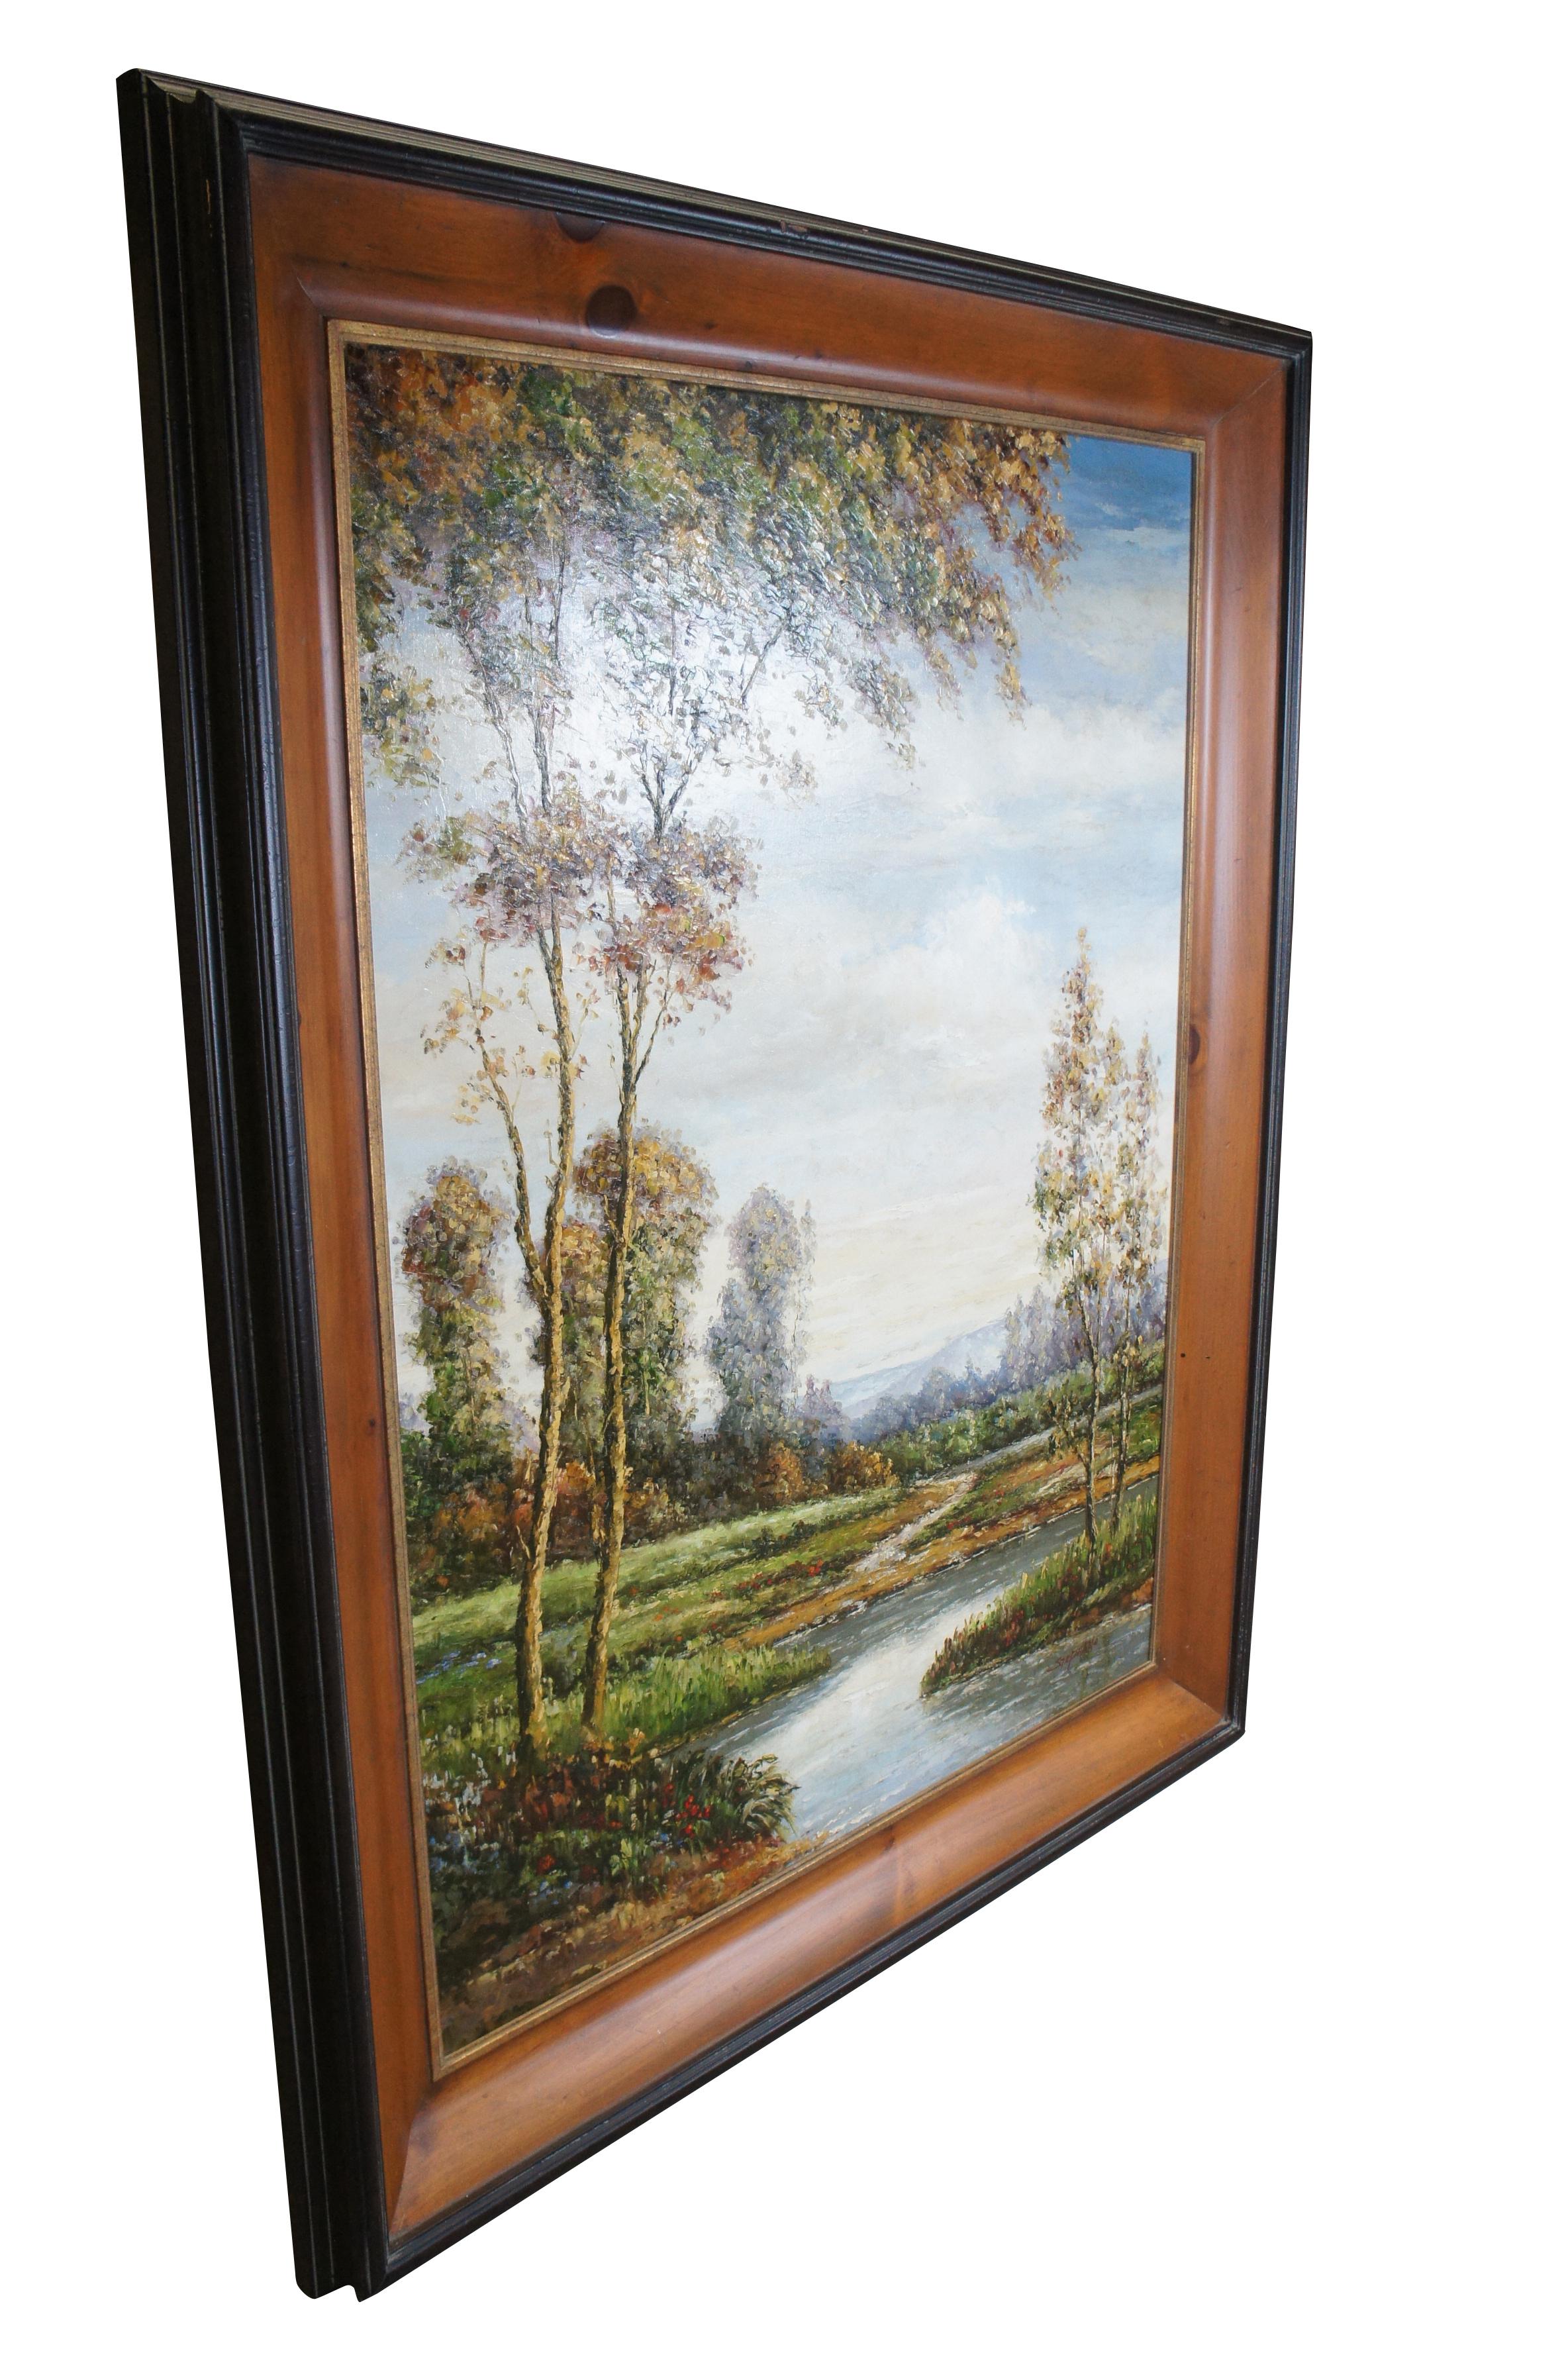 A large and impressive vintage L Stephano Impressionist / Barbizon style landscape oil painting on canvas featuring a river runing through a picturesque countryside.  Framed in ebonized pine frame.

L. Stephano whom was born October 4, 1948 in